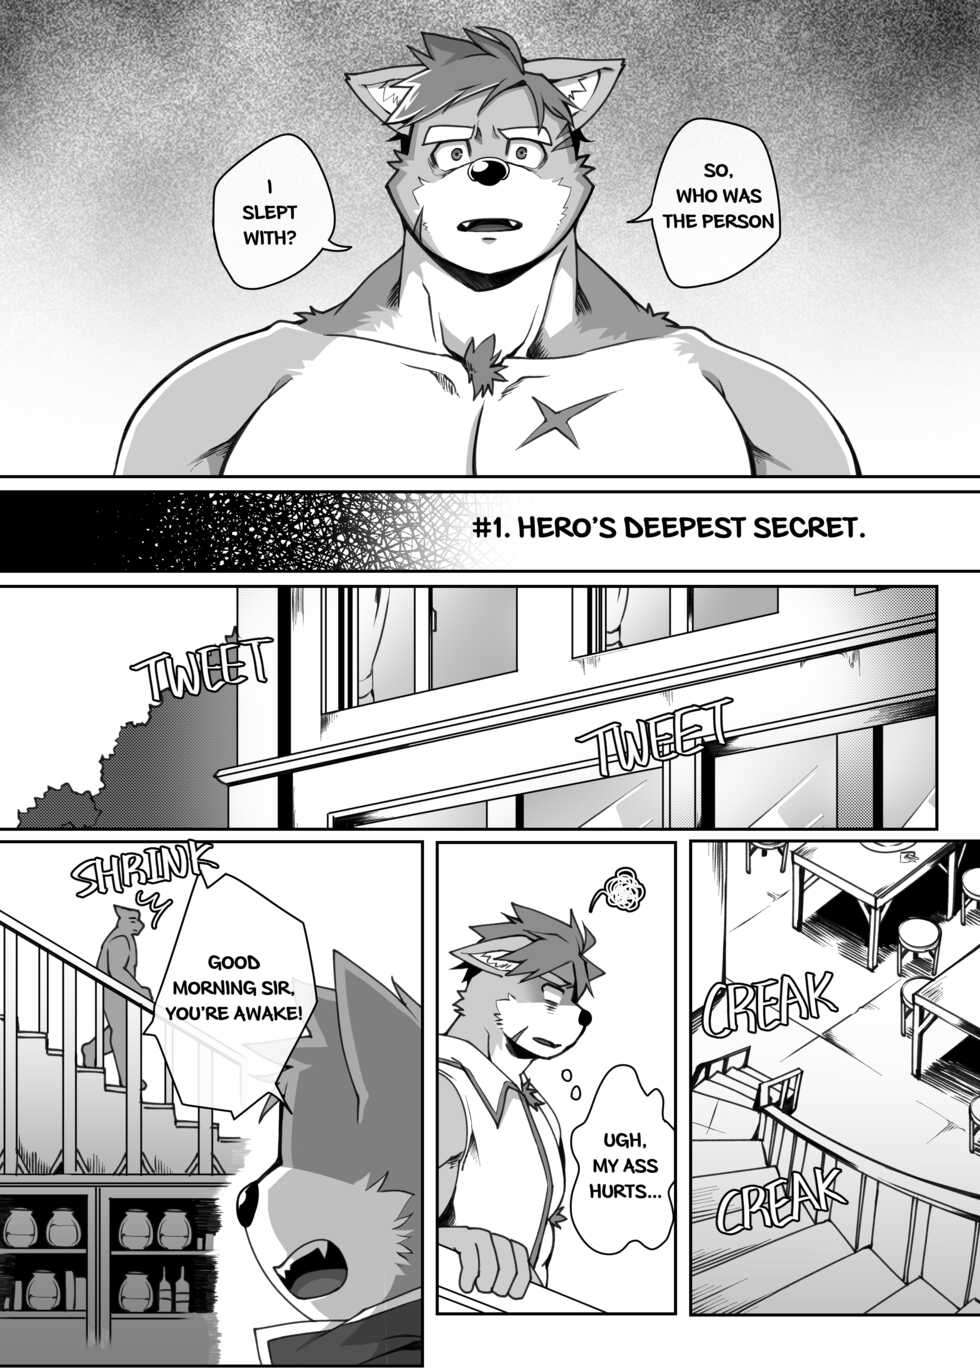 [MIKKY] Hero's Deepest Secret EP1 [English] [Decensored] - Page 6